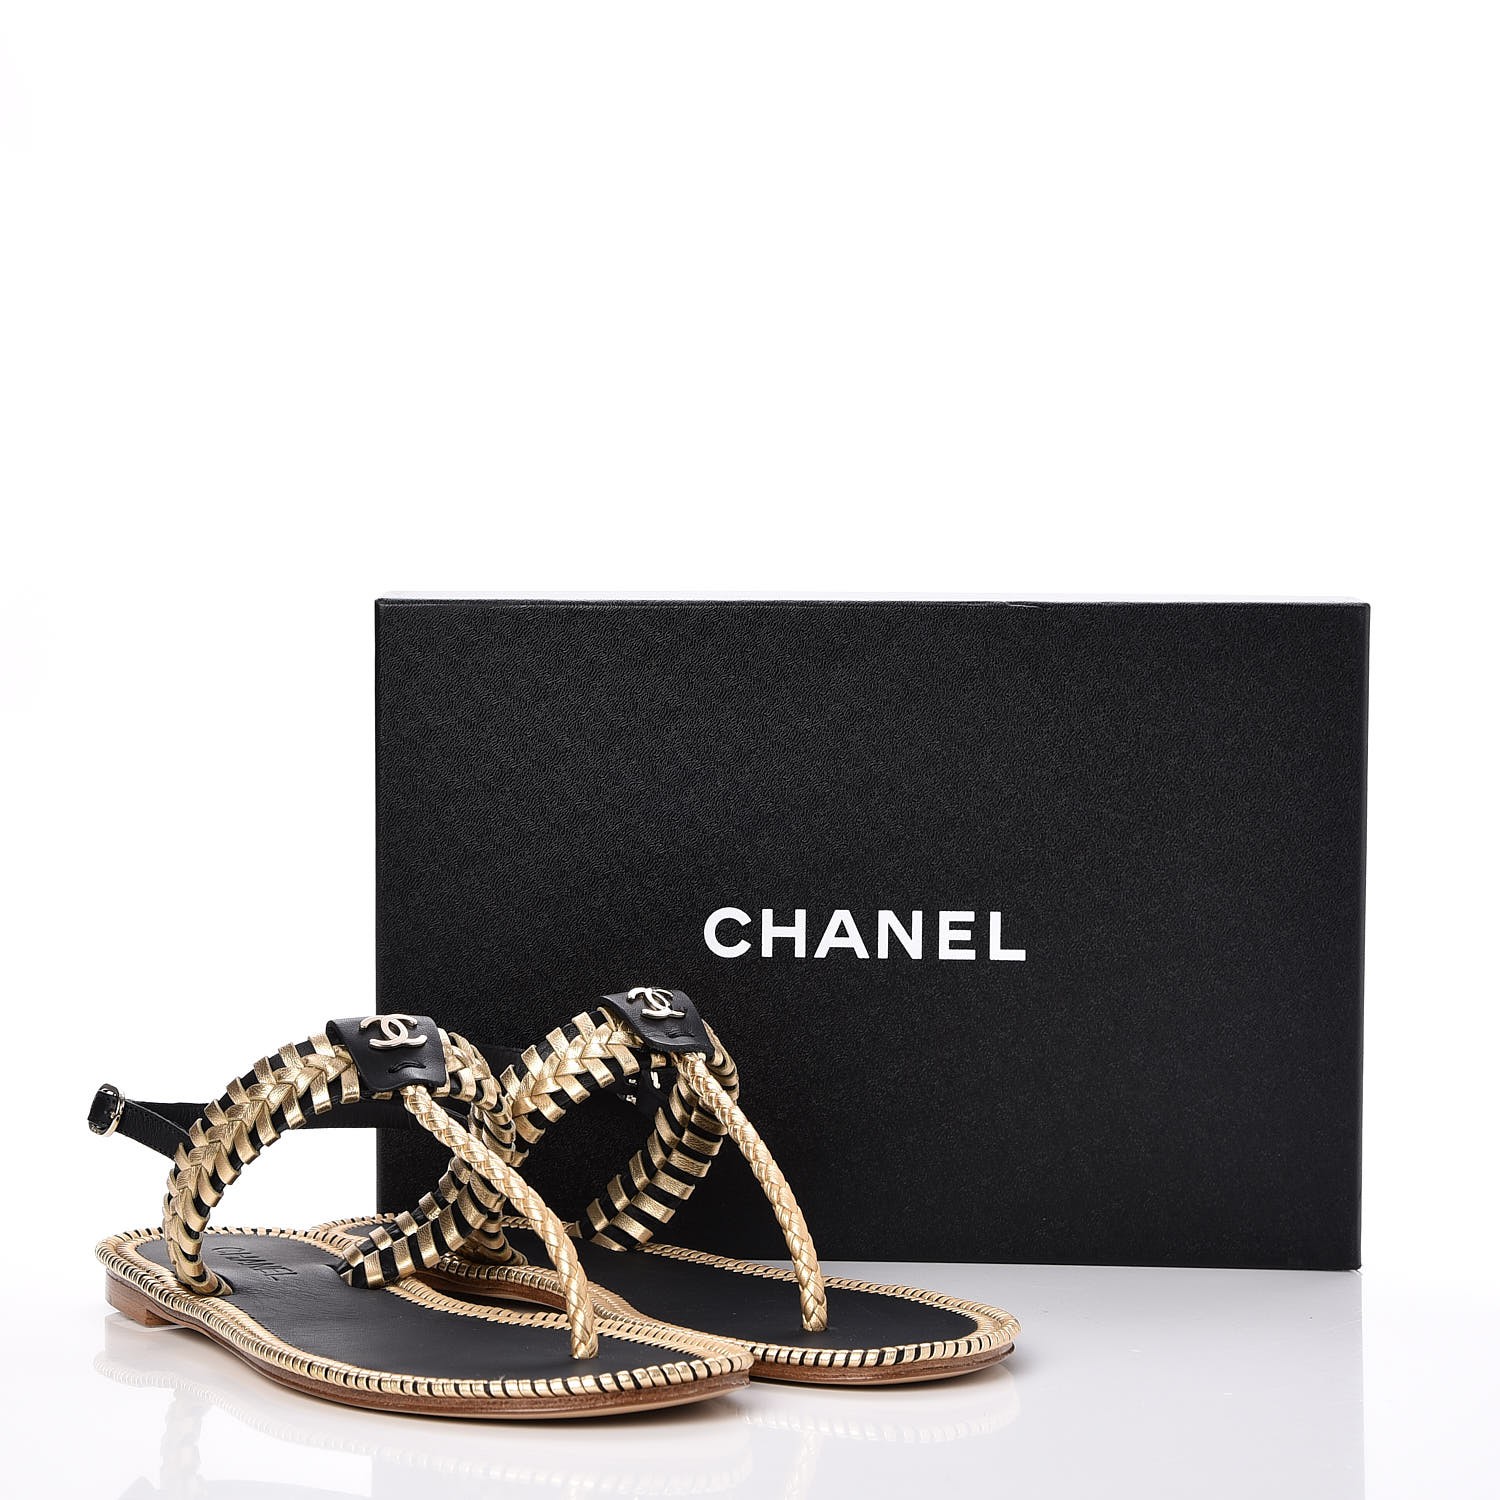 naot strappy sandals